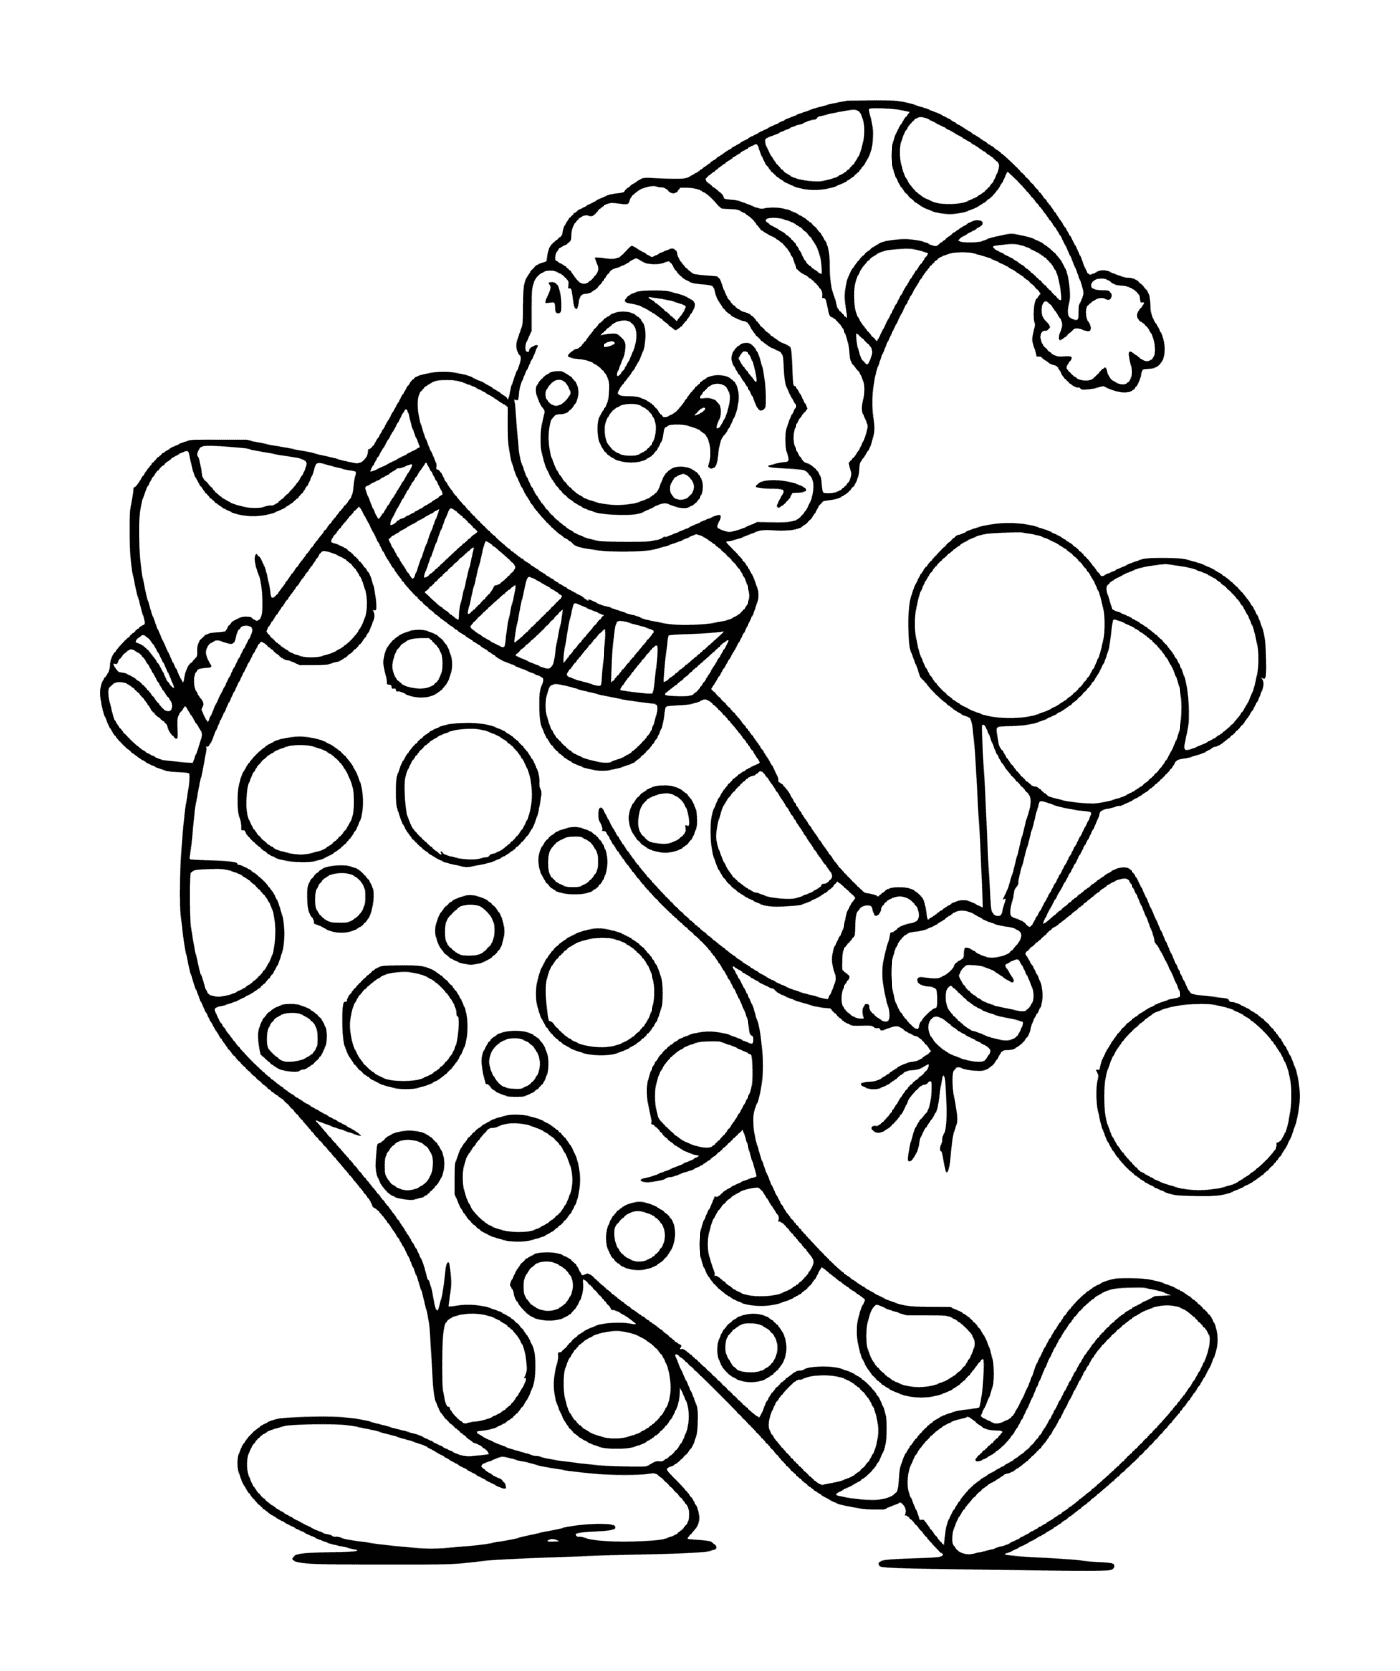  Party Clown Holding Party Ballons 